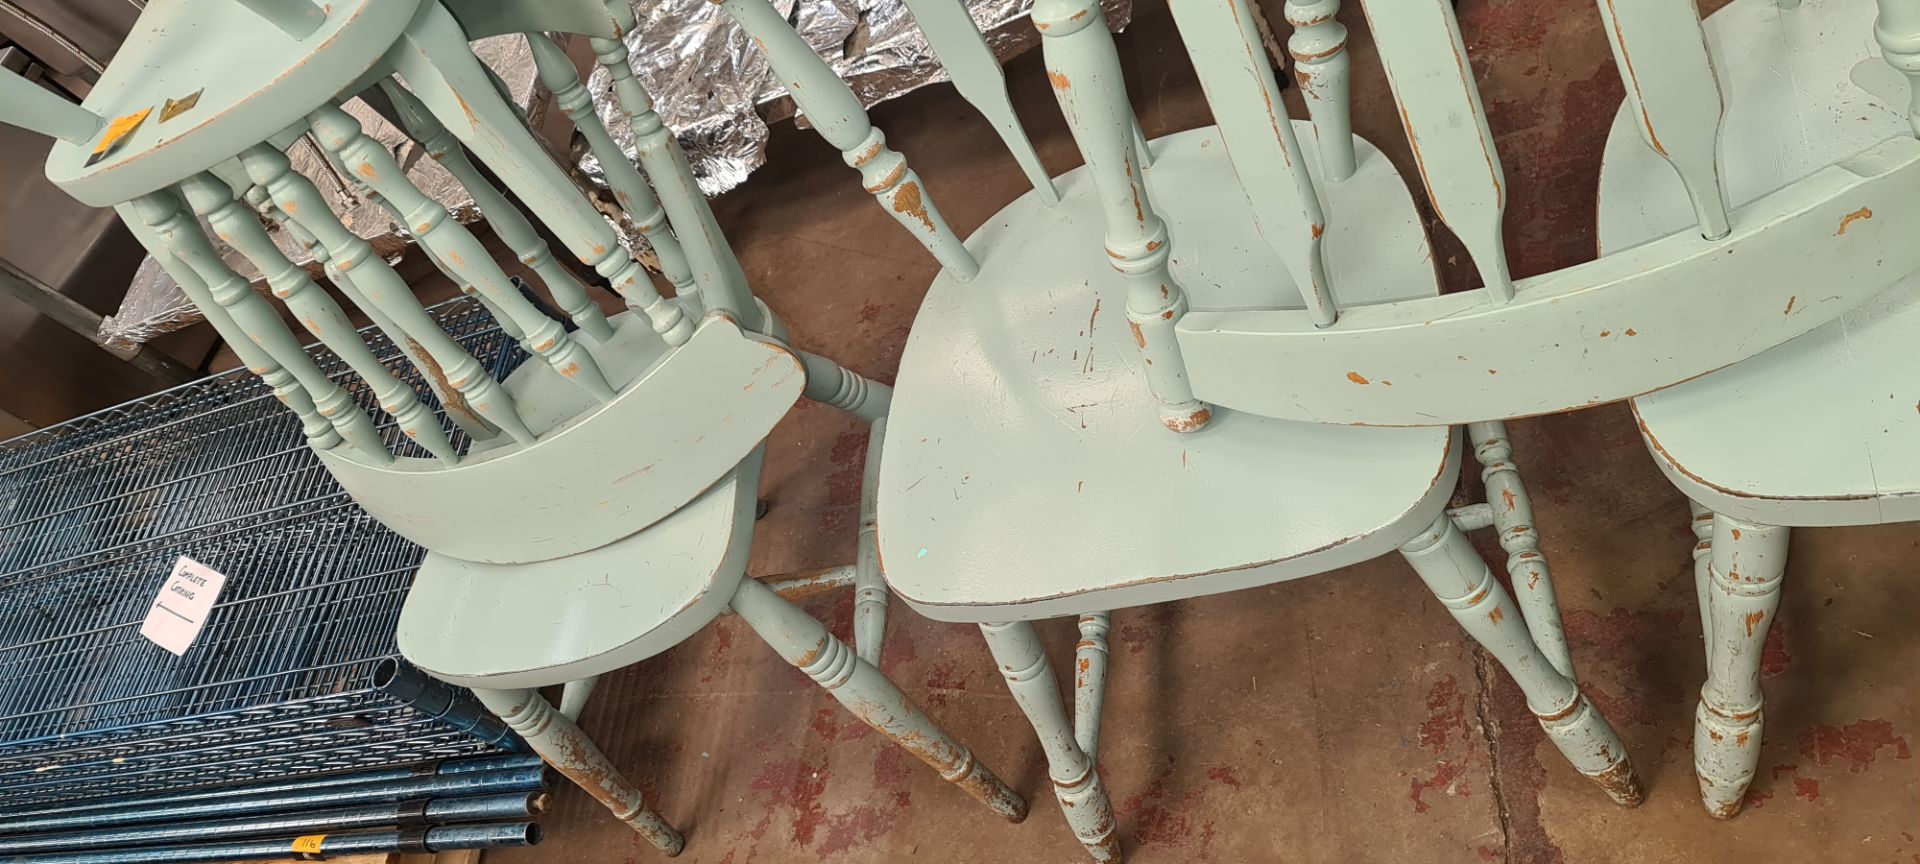 5 off pale blue painted dining chairs - Image 4 of 5